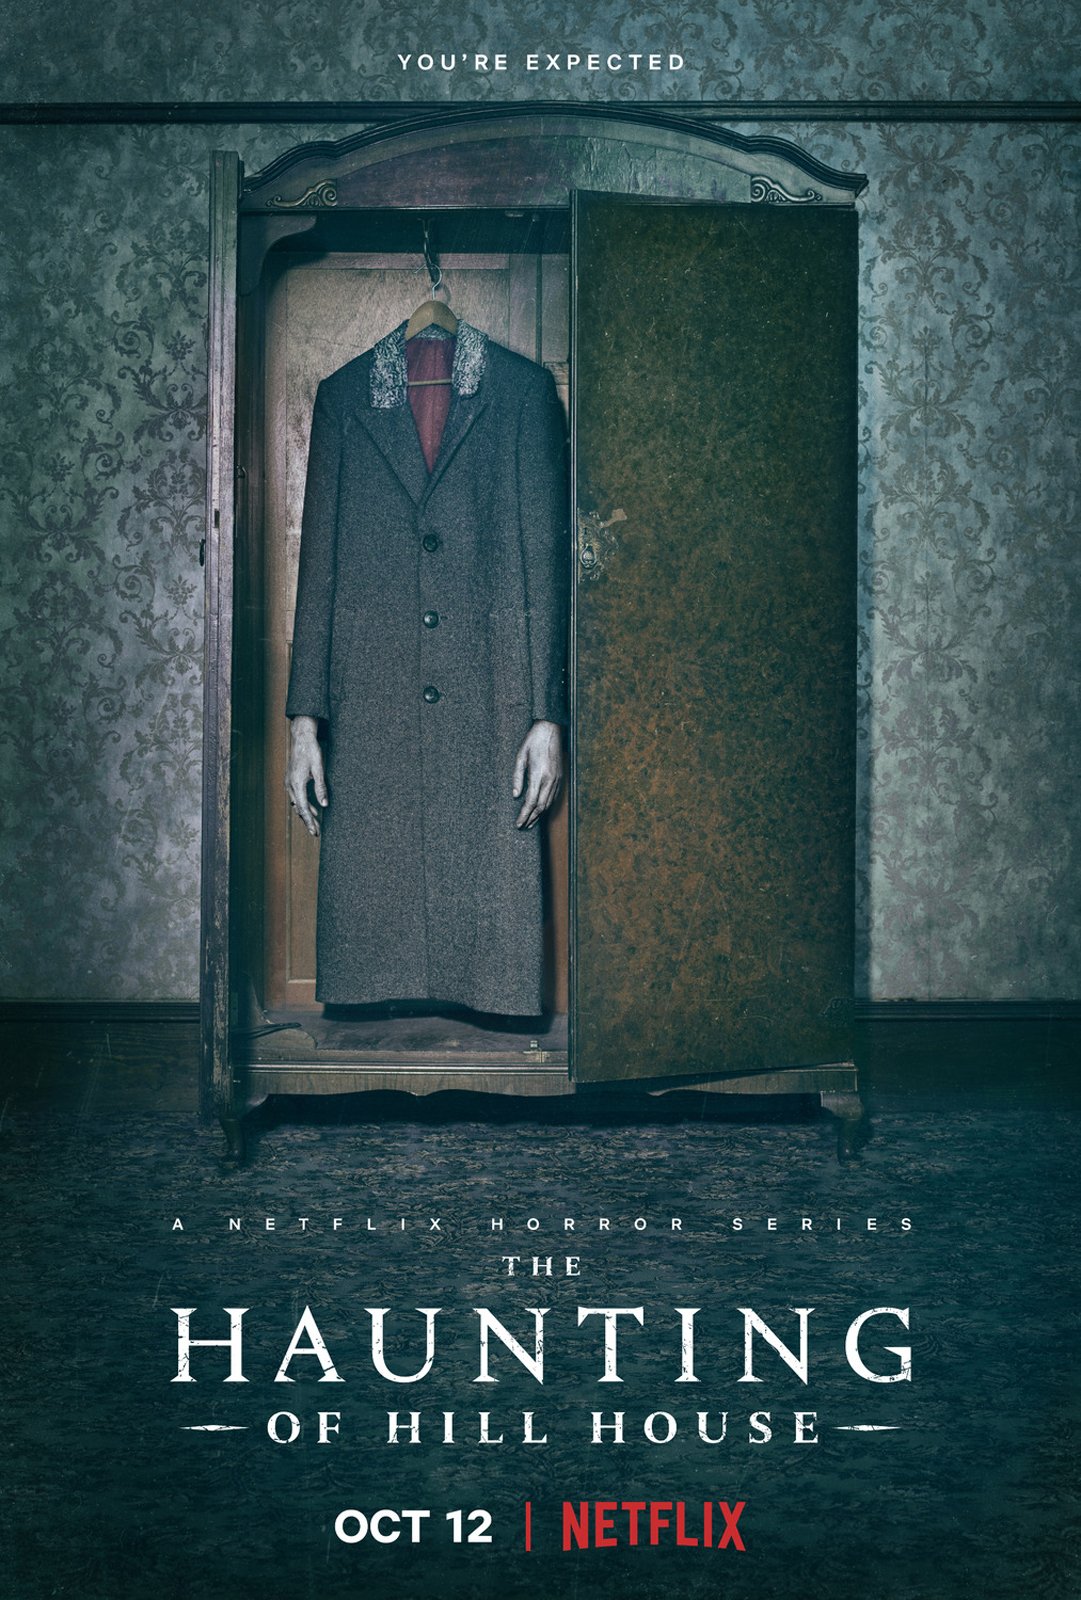 The Haunting of L by Howard Norman